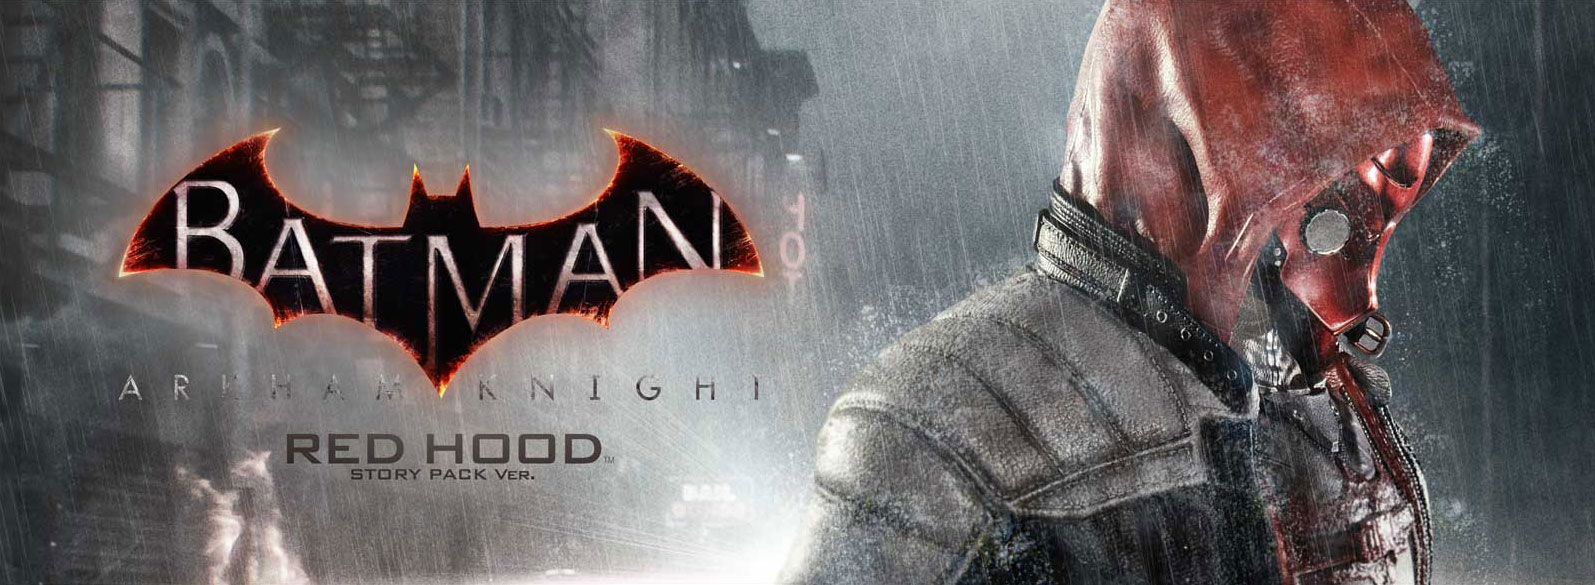 Batman Arkham Knight Red Hood Statue by Prime 1 Studio Preview |  